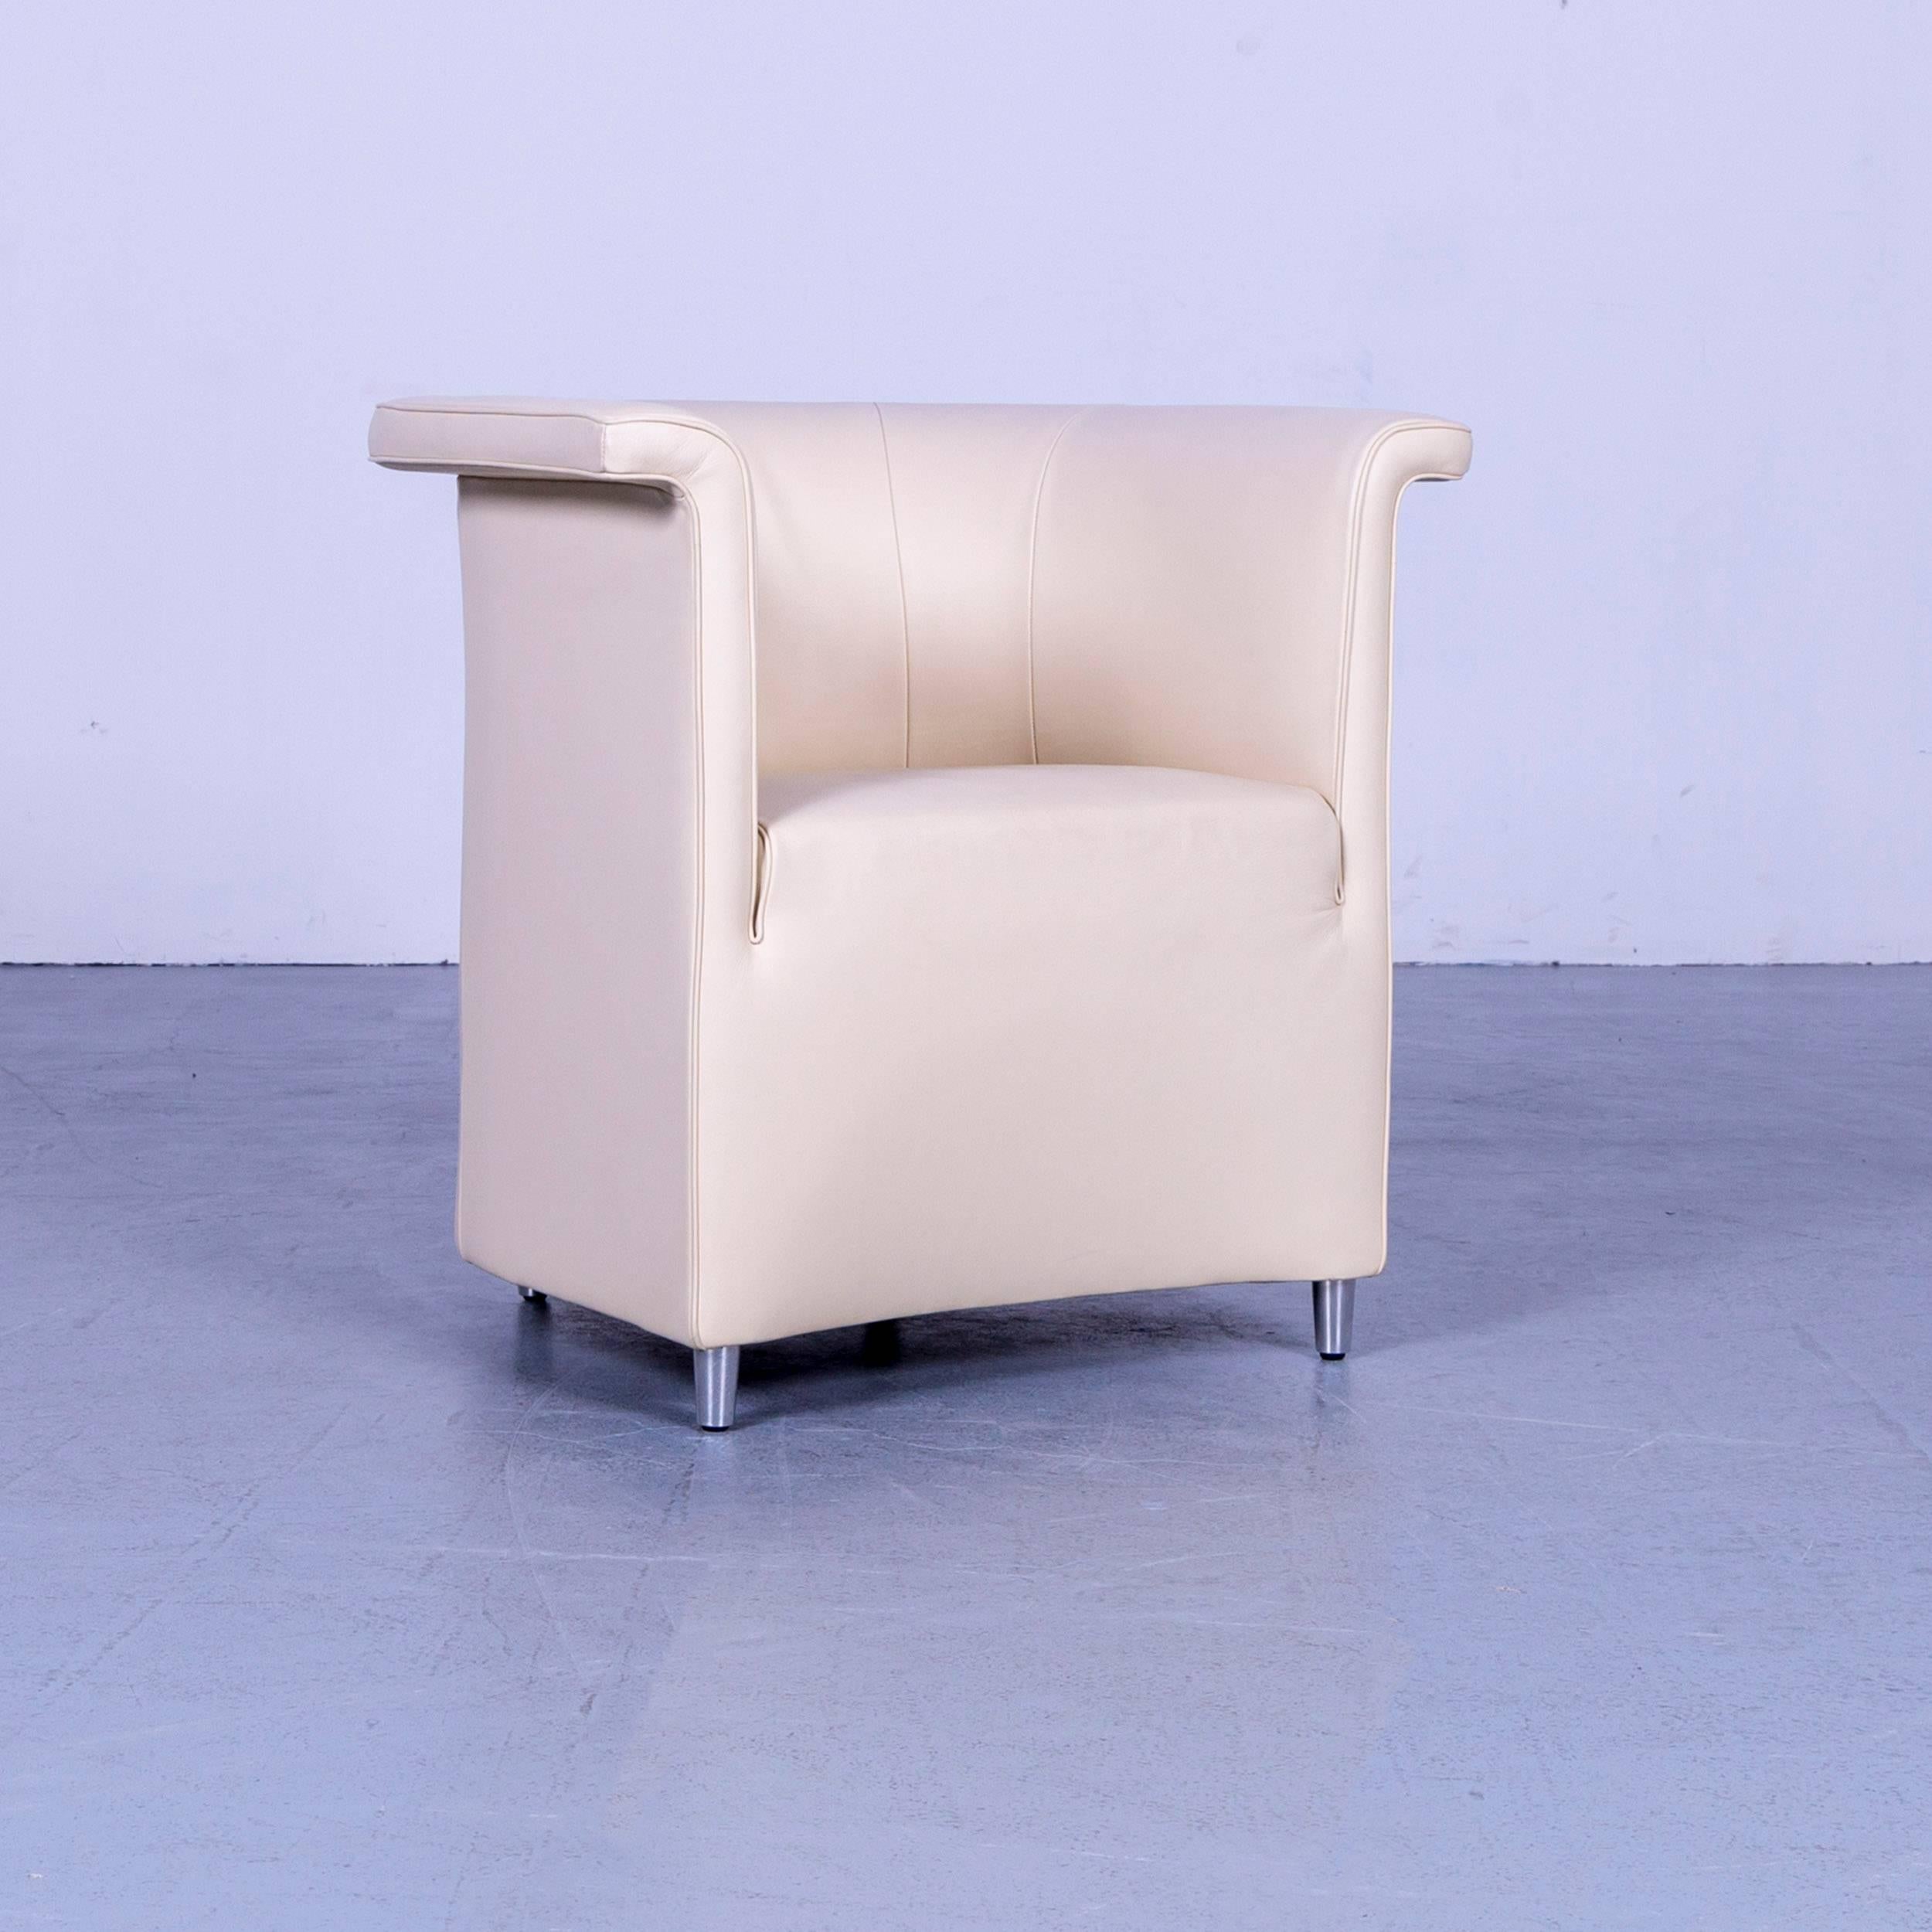 We bring to you an De Sede DS 725 leather armchair beige one-seat.

















